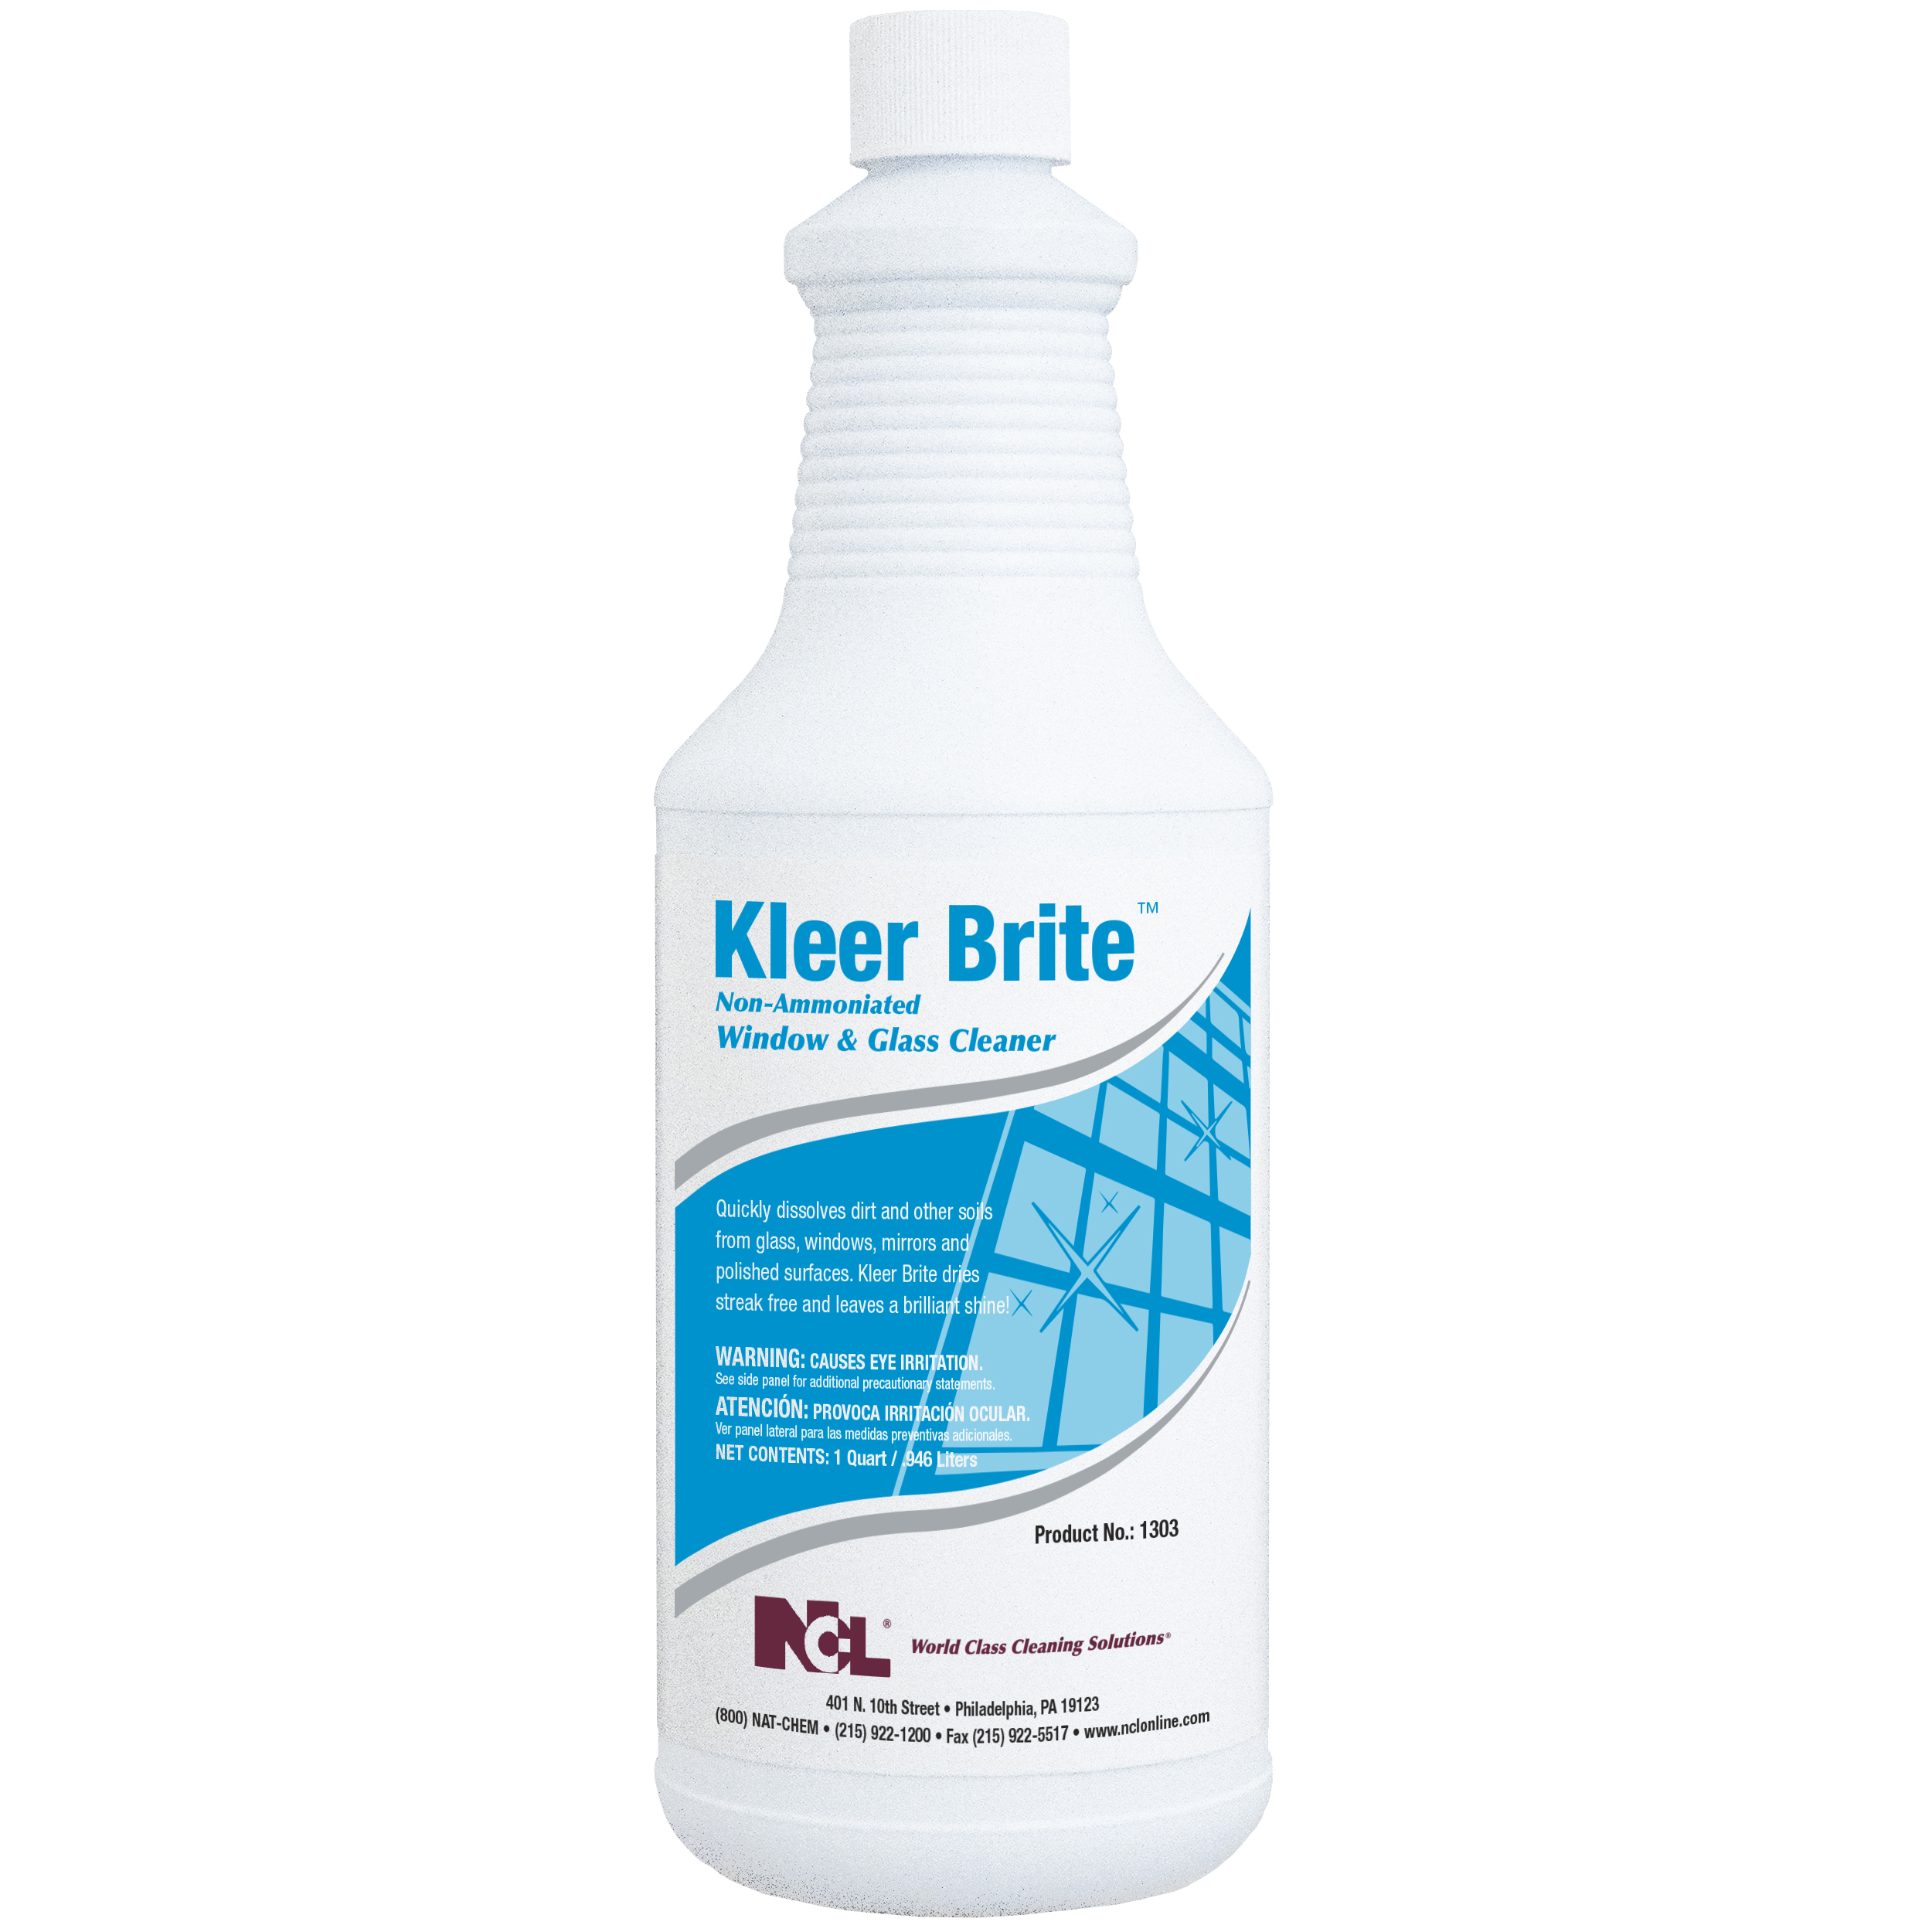  KLEER BRITE Non-Ammoniated Window & Glass Cleaner 12/32 oz (1 Qt.) Case (NCL1303-36) 